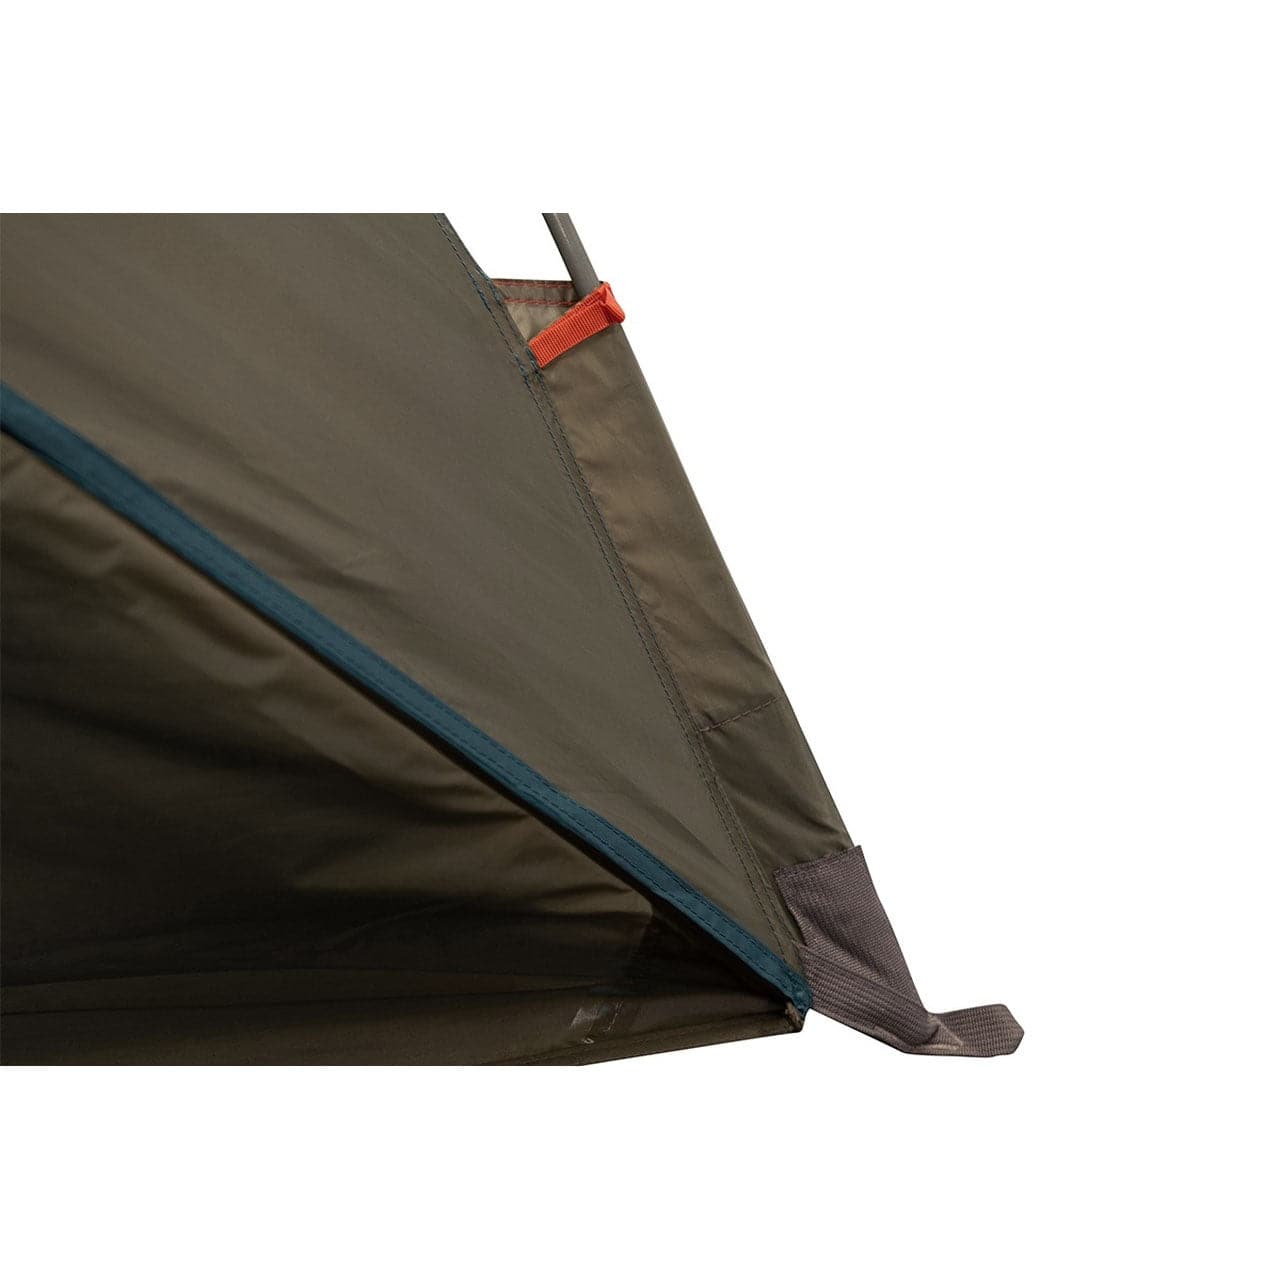 Featuring the Cabana Shade shade manufactured by Kelty shown here from a third angle.